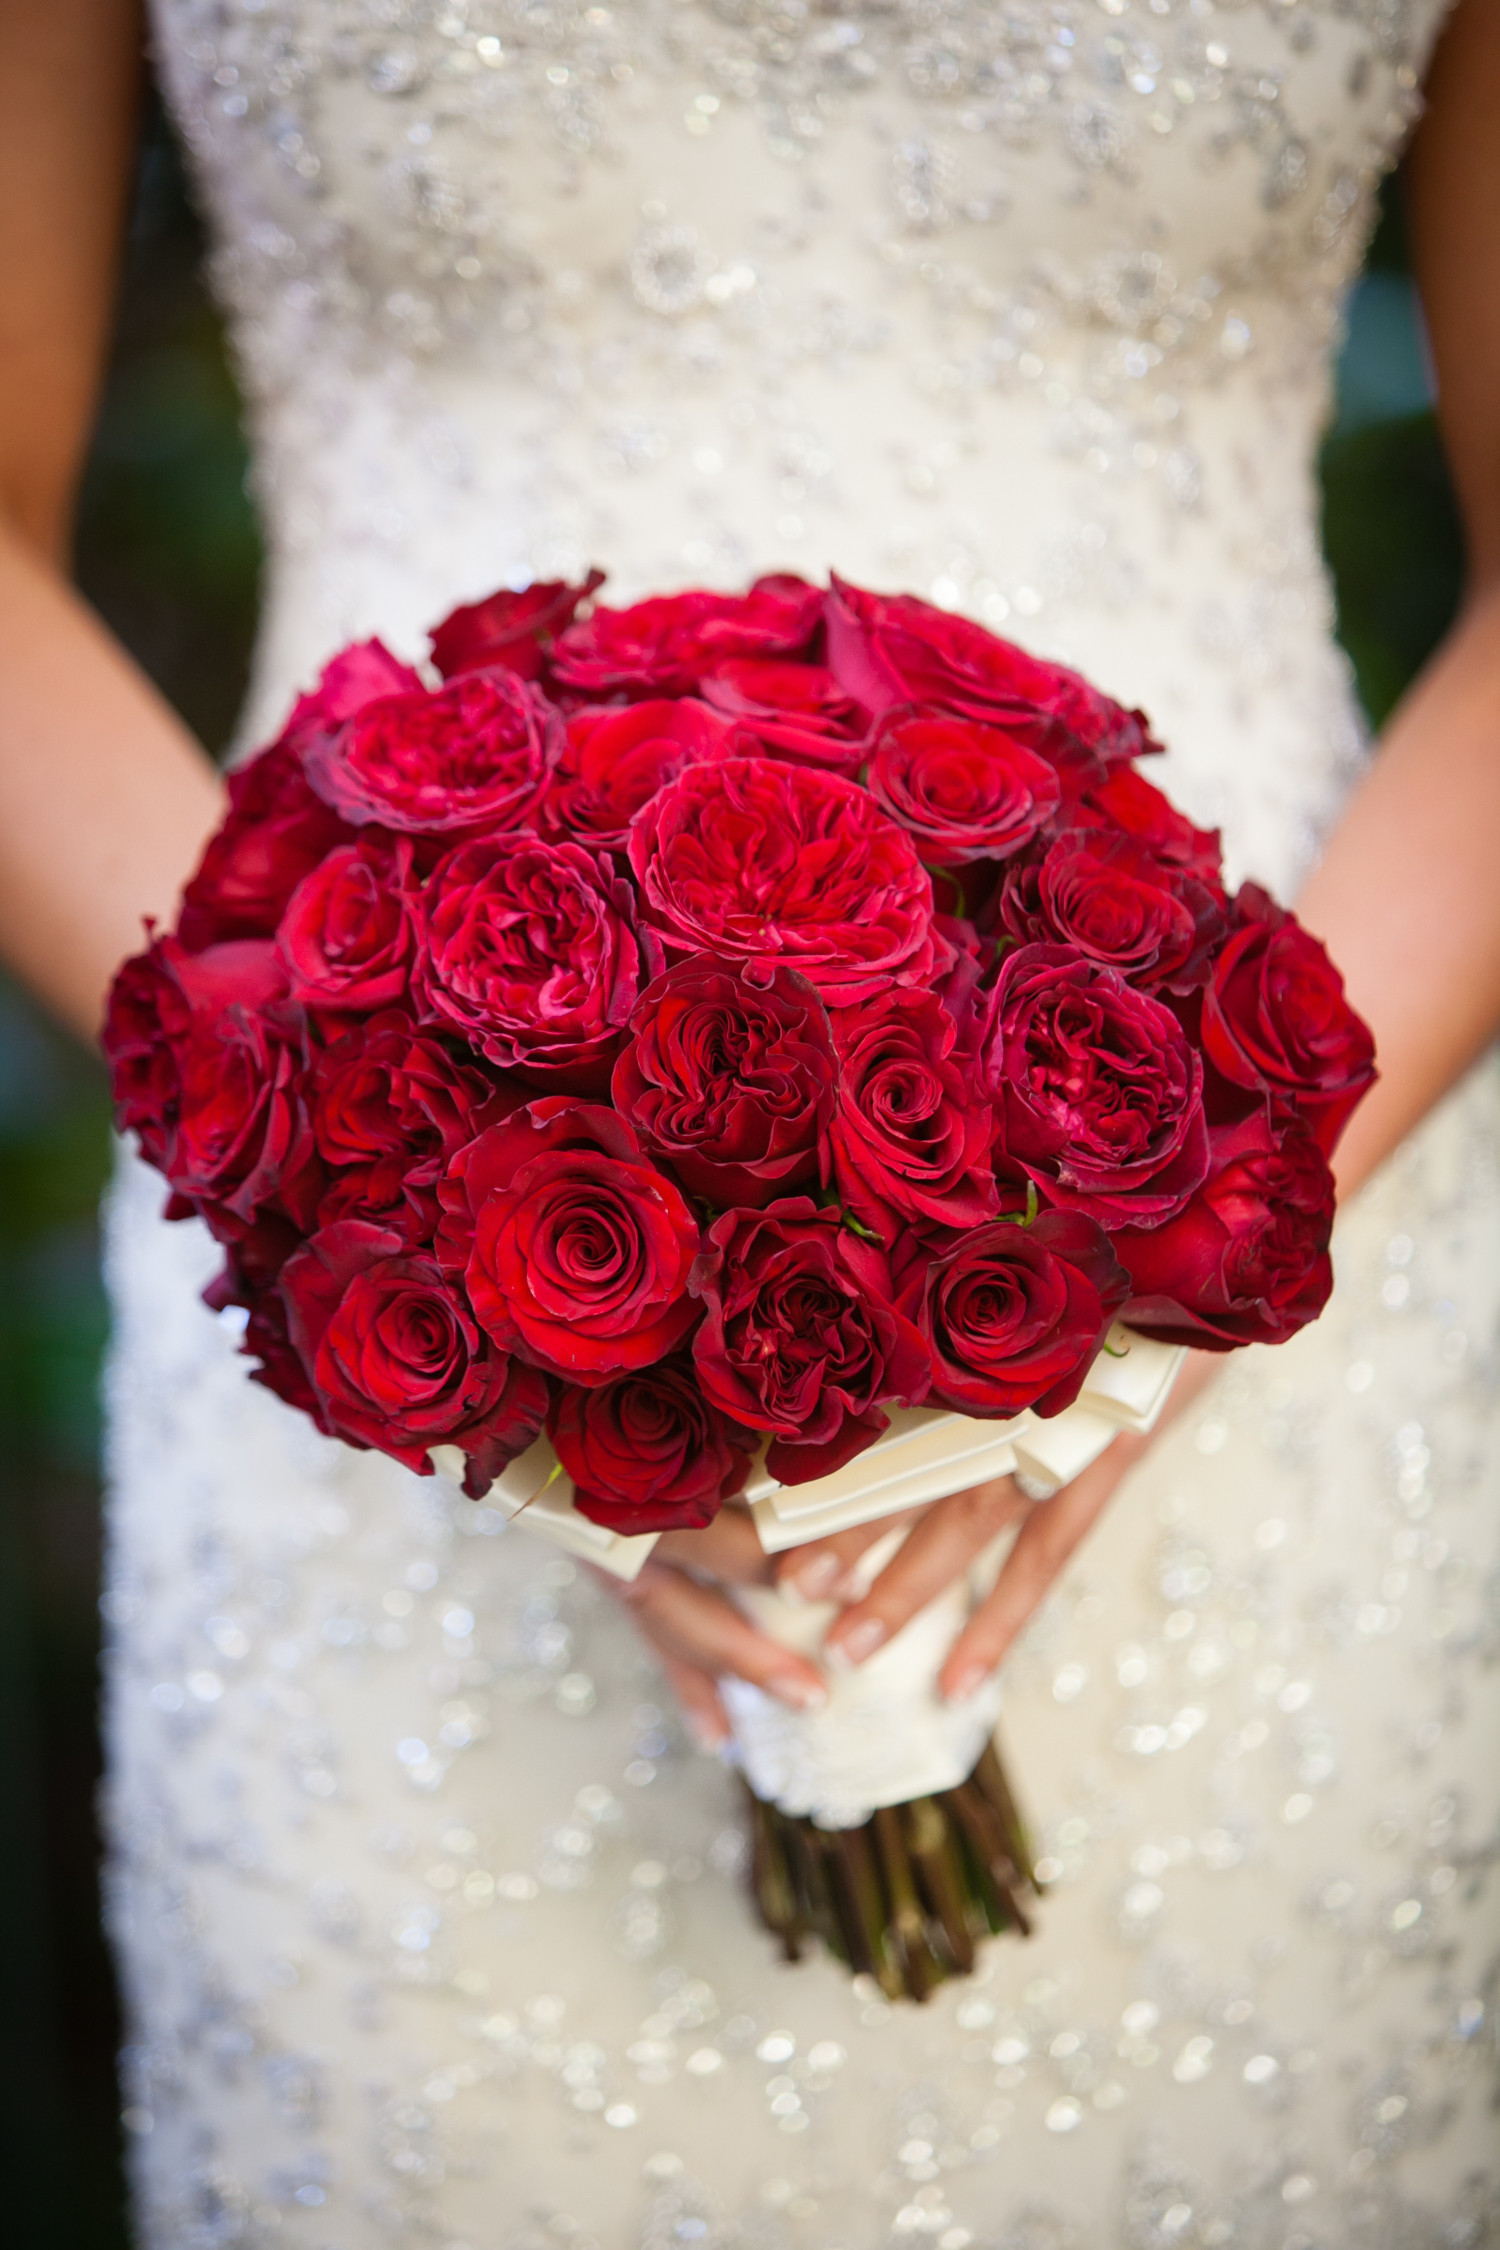 Wedding Flowers Images
 The Best Summer Wedding Bouquets